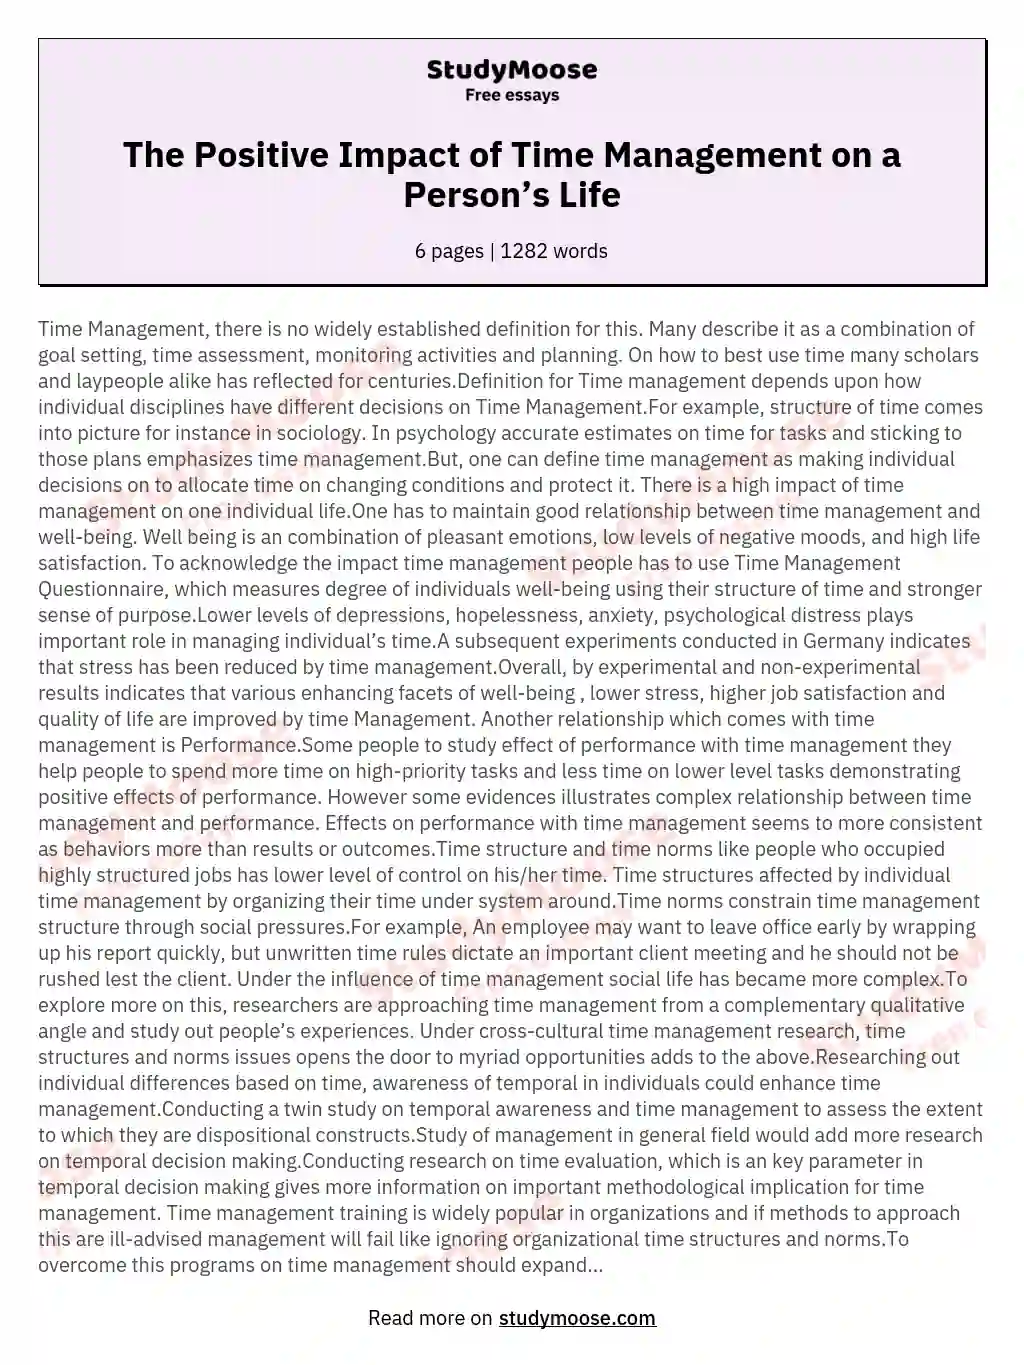 The Positive Impact of Time Management on a Person’s Life essay